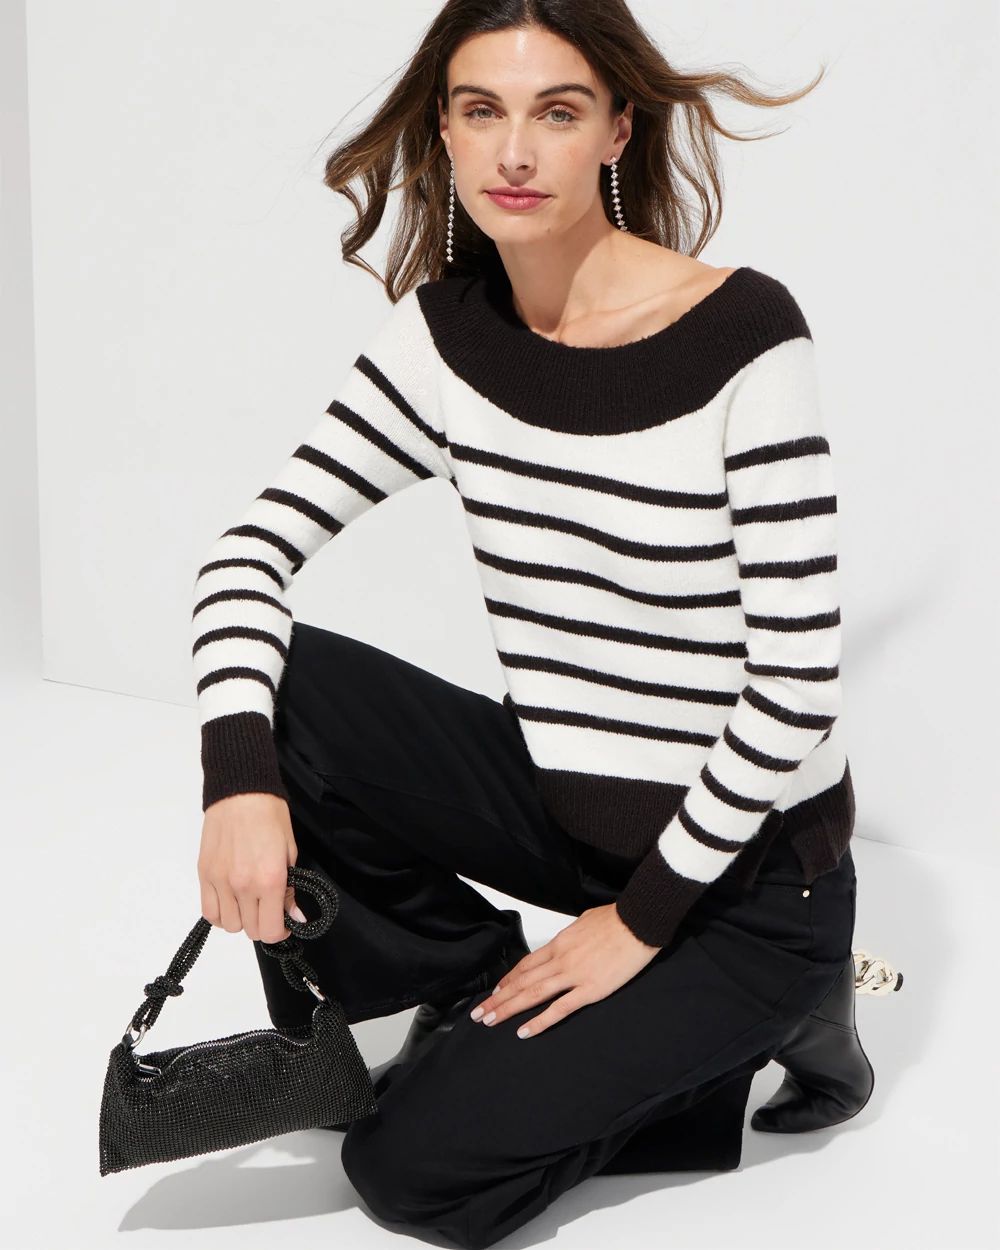 Outlet WHBM Long Sleeve At-The-Shoulder Pullover click to view larger image.